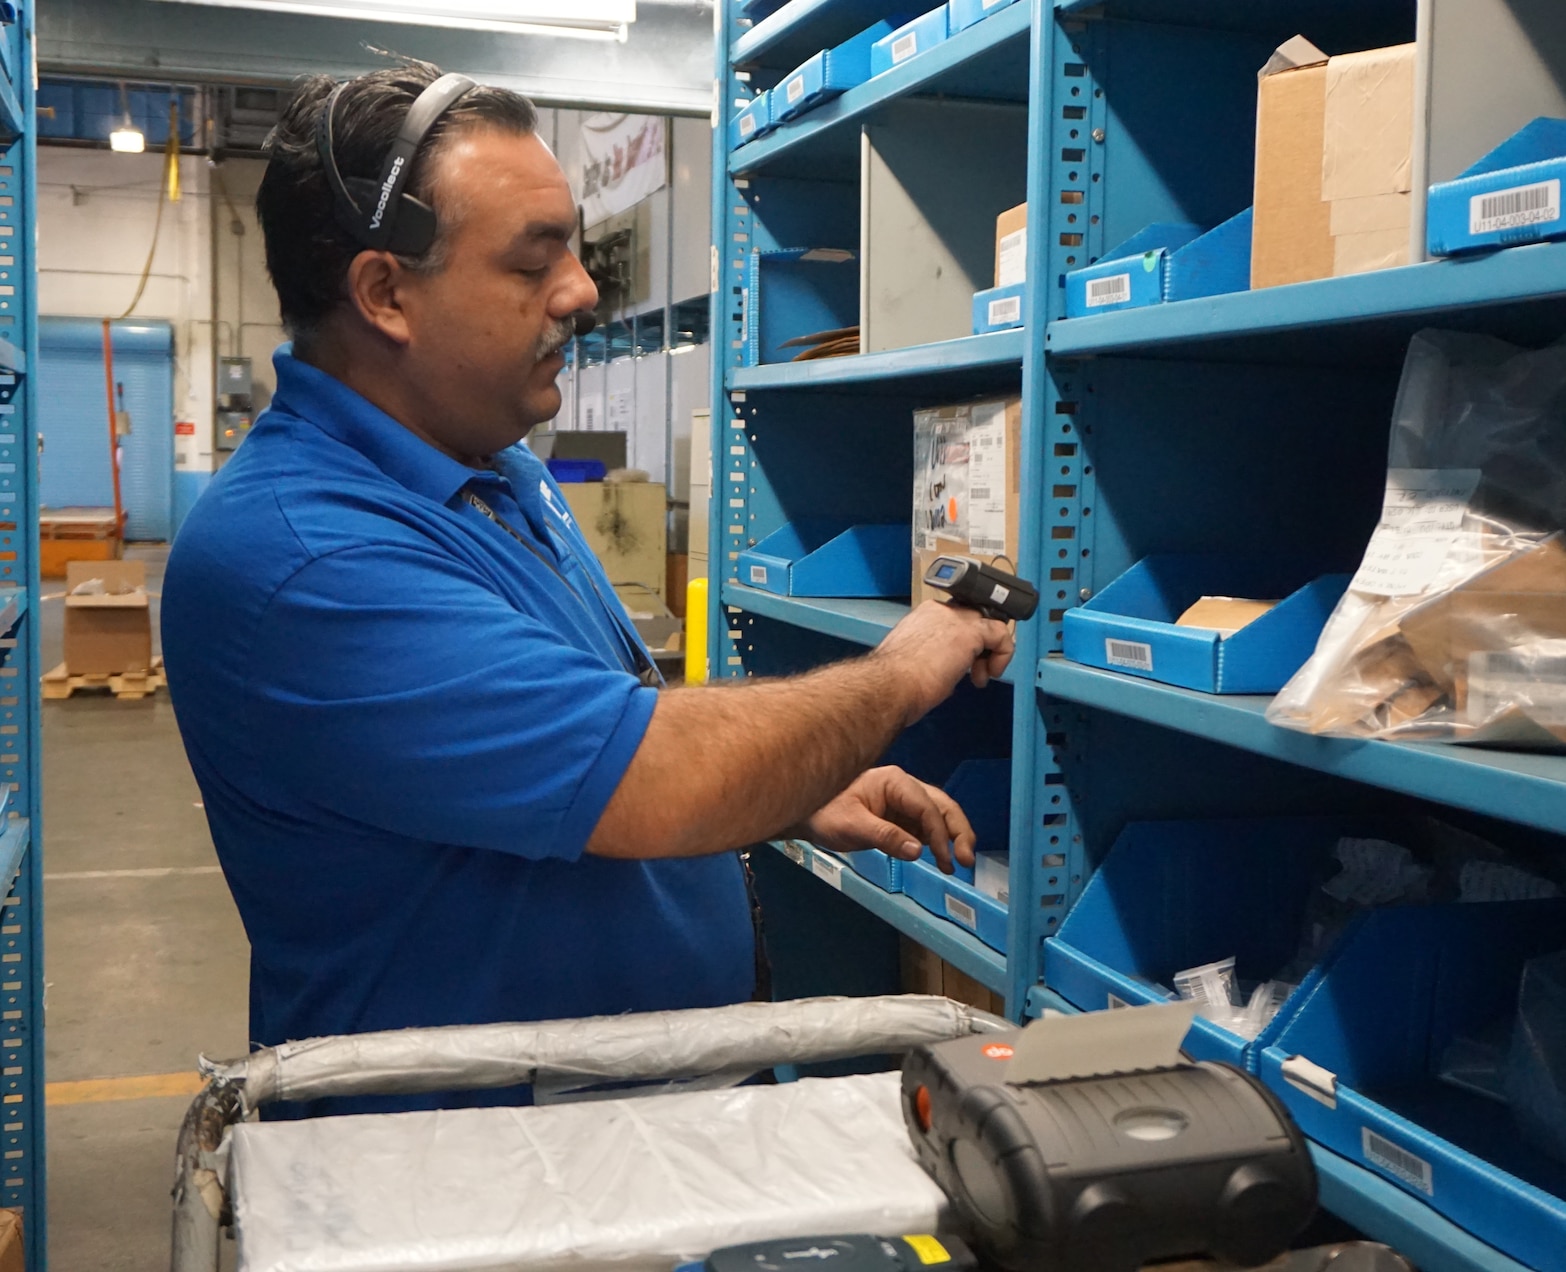 A man uses a headset and a small device attached to his hand to select items from a warehouse shelf